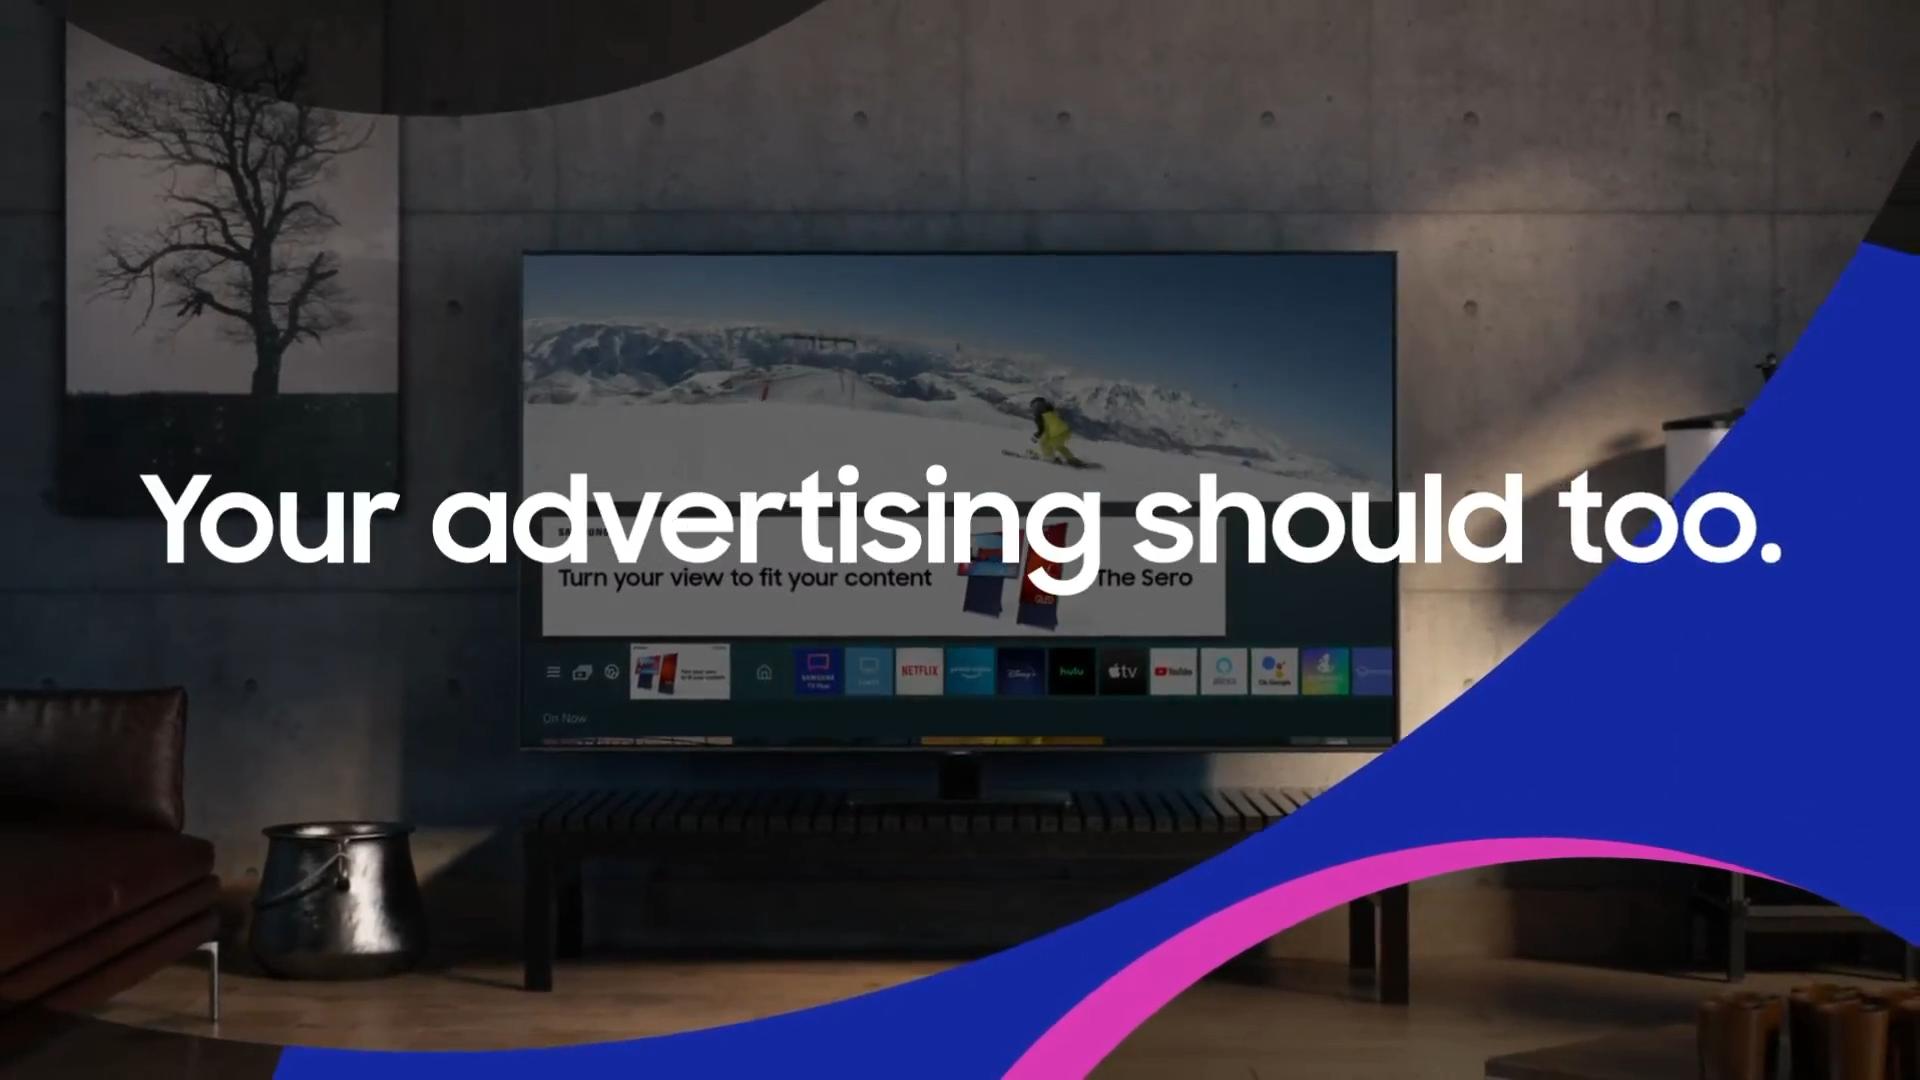 Still frame from Samsung's video. A television is shown. The television shows a skier on a mountain slope, but the lower half of the screen is obscured by large interface elements and an advertisement.